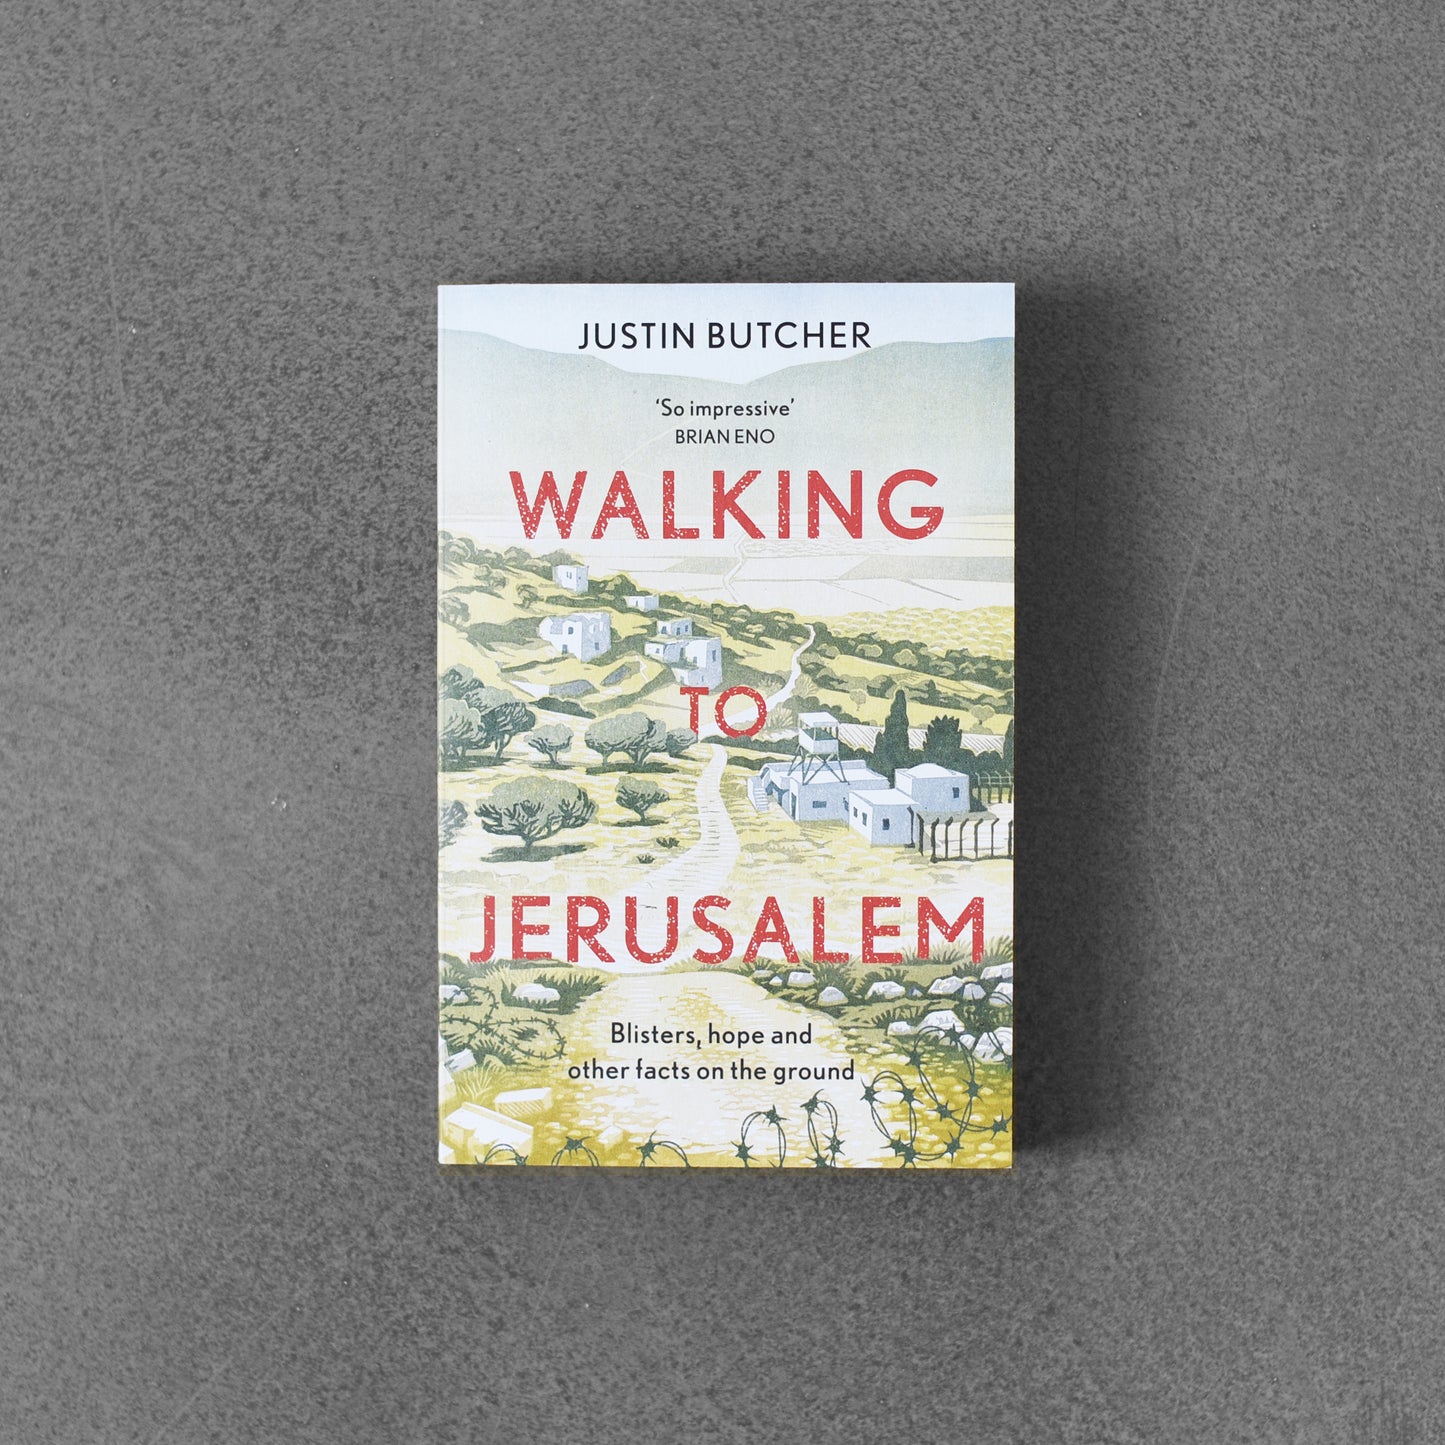 Walking to Jerusalem: Blisters, Hope and Other Facts on the Ground - Justin Butcher